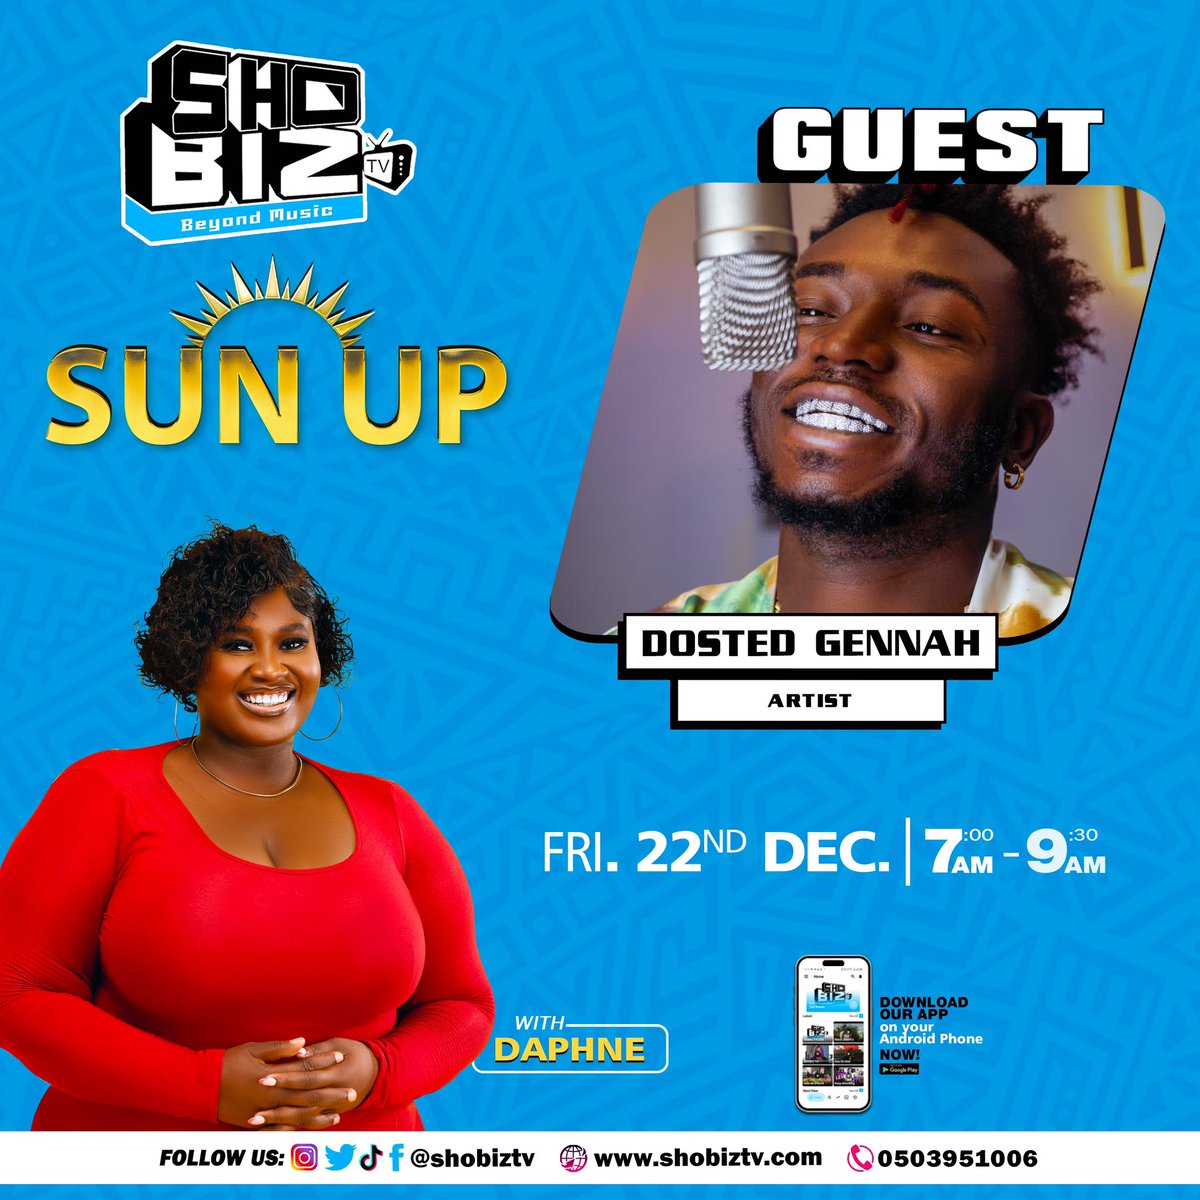 DMI : Four big sold artists tomorrow on the SunUp show!! You can’t afford to miss this 🚨🔥
@dosted_genah 
@yawdarlingmusic 
@crispen_music 
@princybright 

#ShobizTV